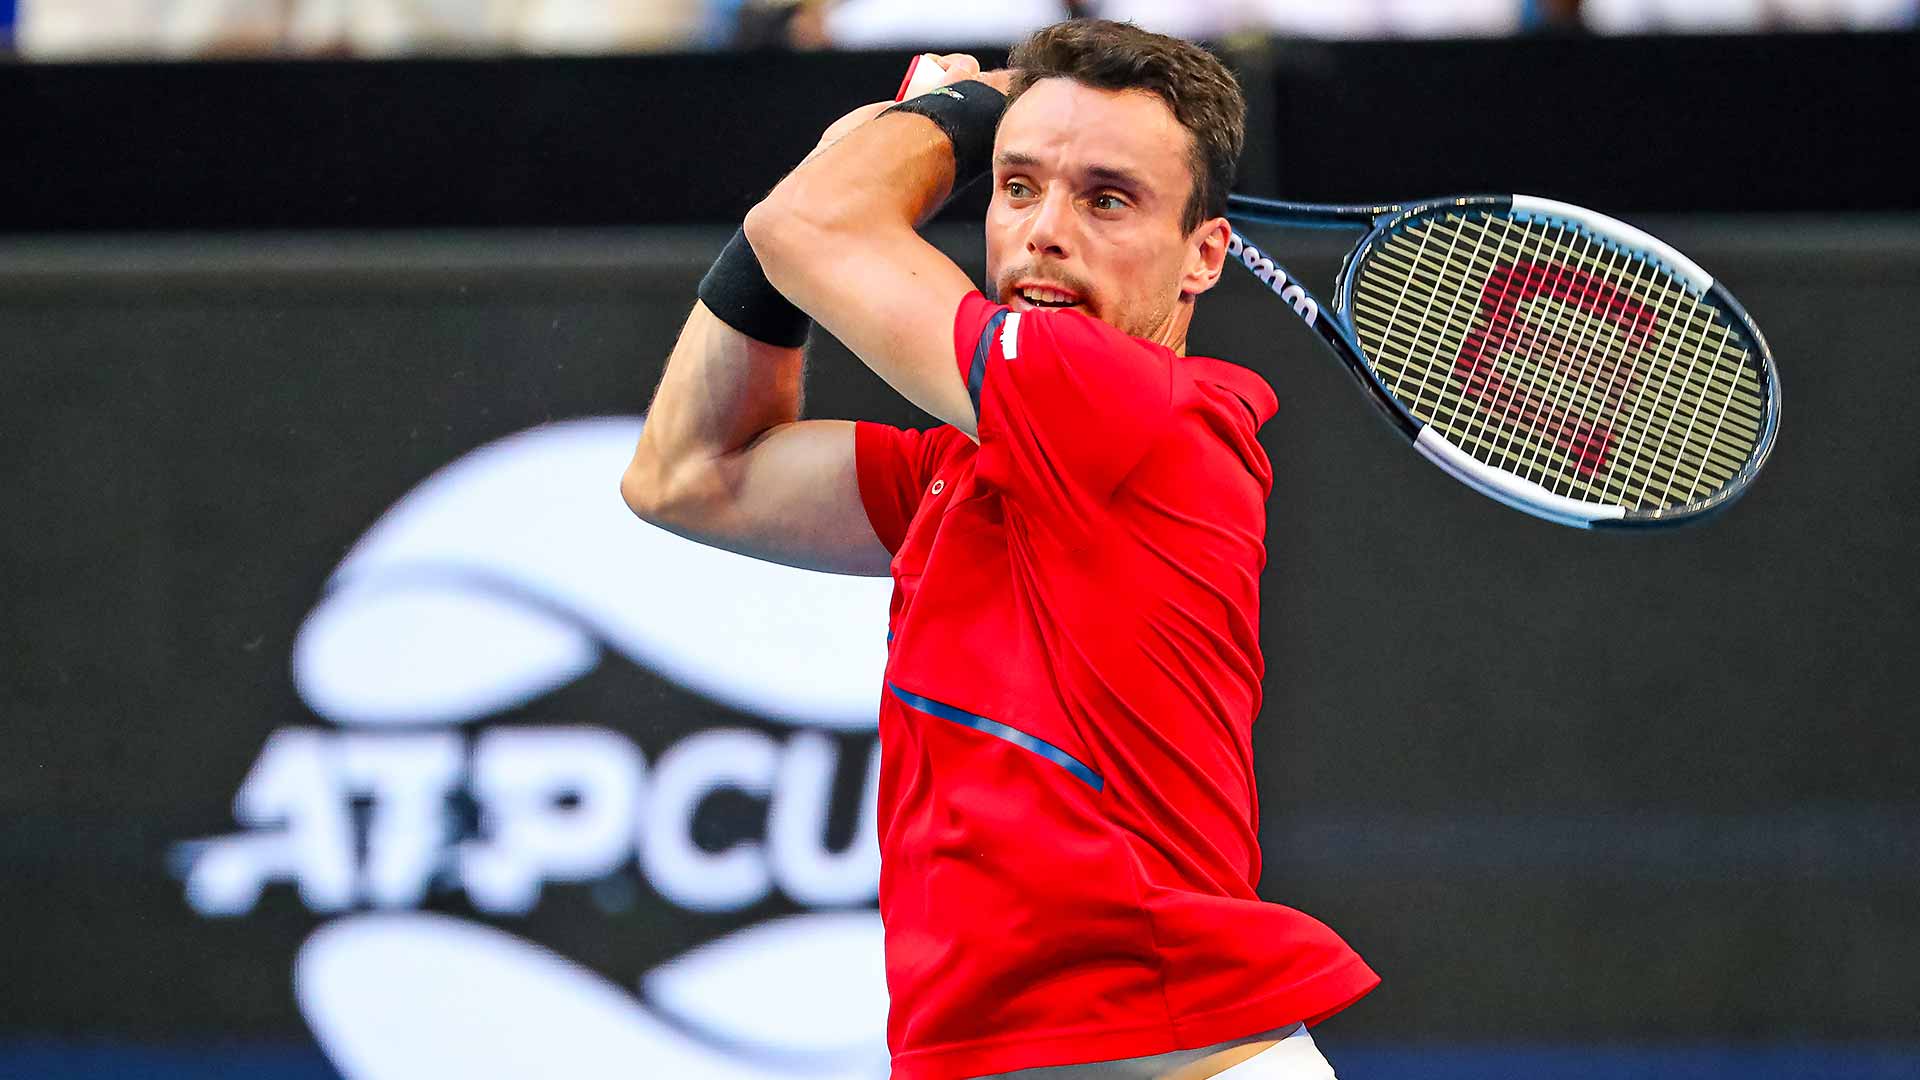 Roberto Bautista Agut went 6-0 in singles play at the inaugural ATP Cup.